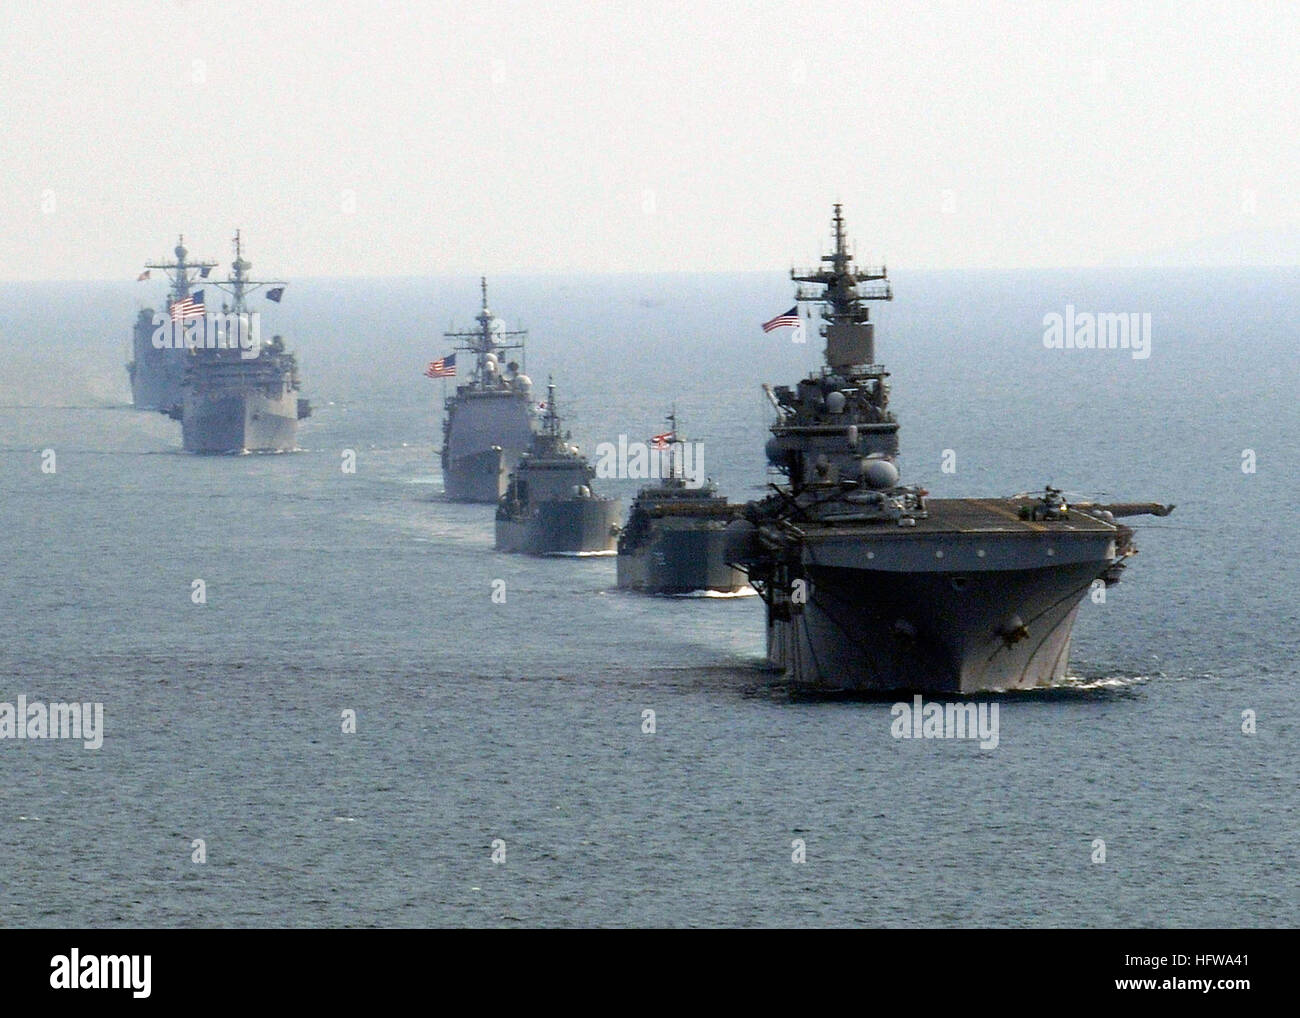 100208-N-9418A-572 GULF OF THAILAND (Feb. 8, 2010) The forward-deployed amphibious assault ship USS Essex (LHD 2), the Royal Thai navy medium landing ship HTMS Surin (LST 722), the Republic of Korea navy tank landing ship Seongin Bong (LST 685), the Ticonderoga-class guided-missile cruiser USS Shiloh (CG 67), the forward-deployed amphibious dock landing ship USS Harpers Ferry (LSD 49) and the forward-deployed amphibious transport dock ship USS Denver (LPD 9) transit in formation in the Gulf of Thailand during exercise Cobra Gold 2010. (U.S. Navy photo by Mass Communication Specialist 3rd Class Stock Photo